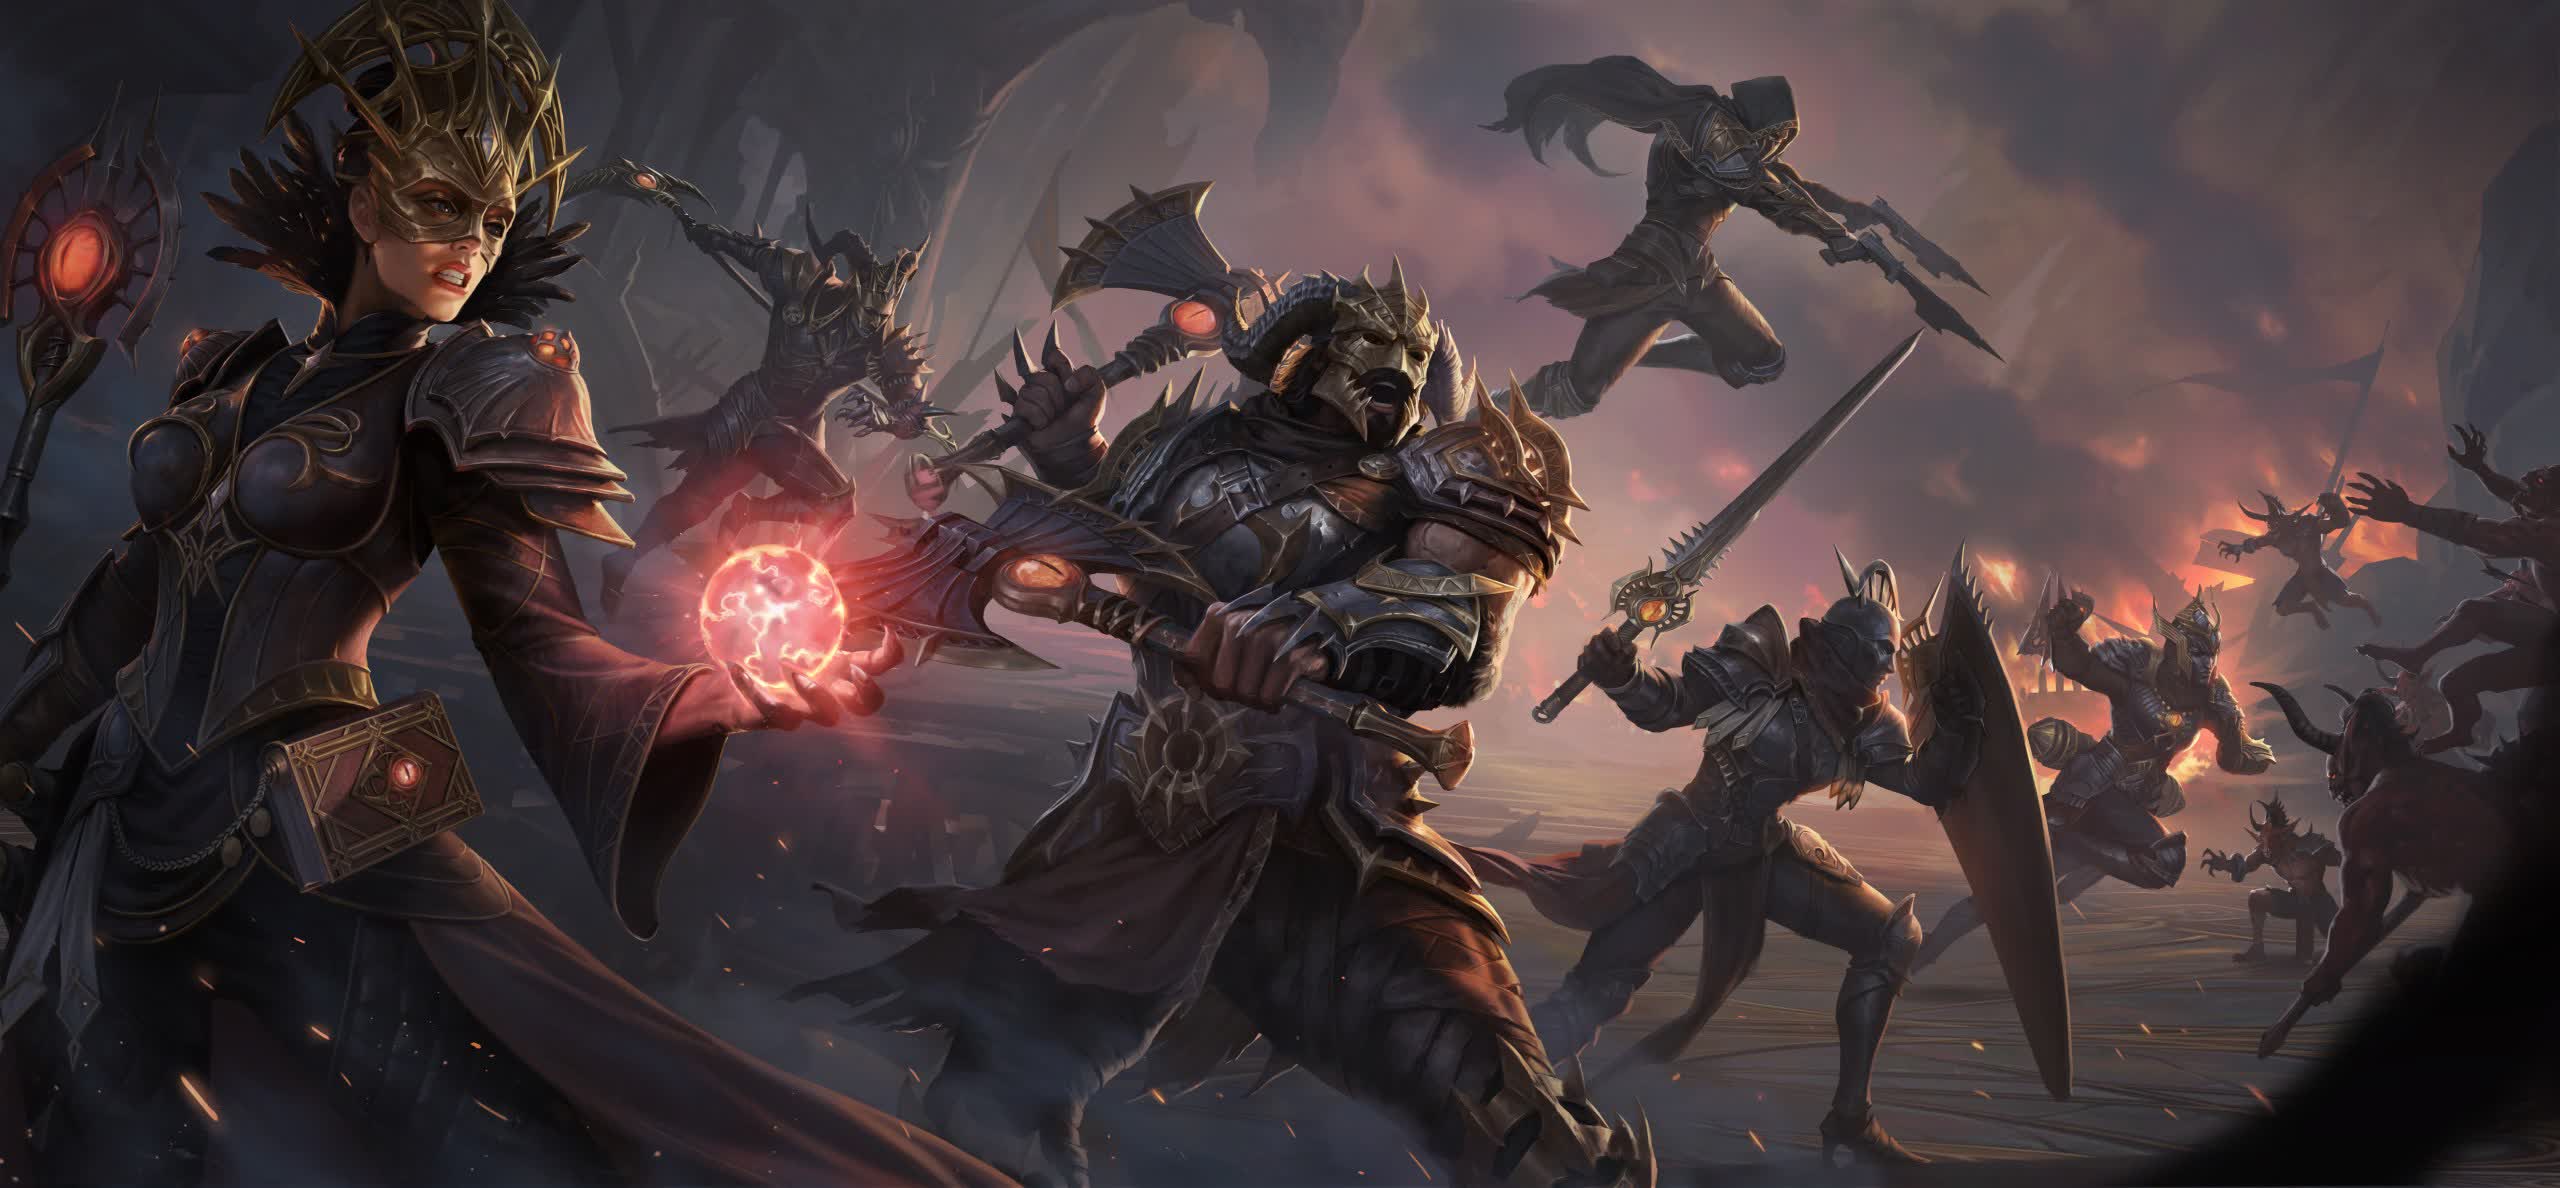 Blizzard yanked 'Diablo Immortal' from regions with strict loot box regulations